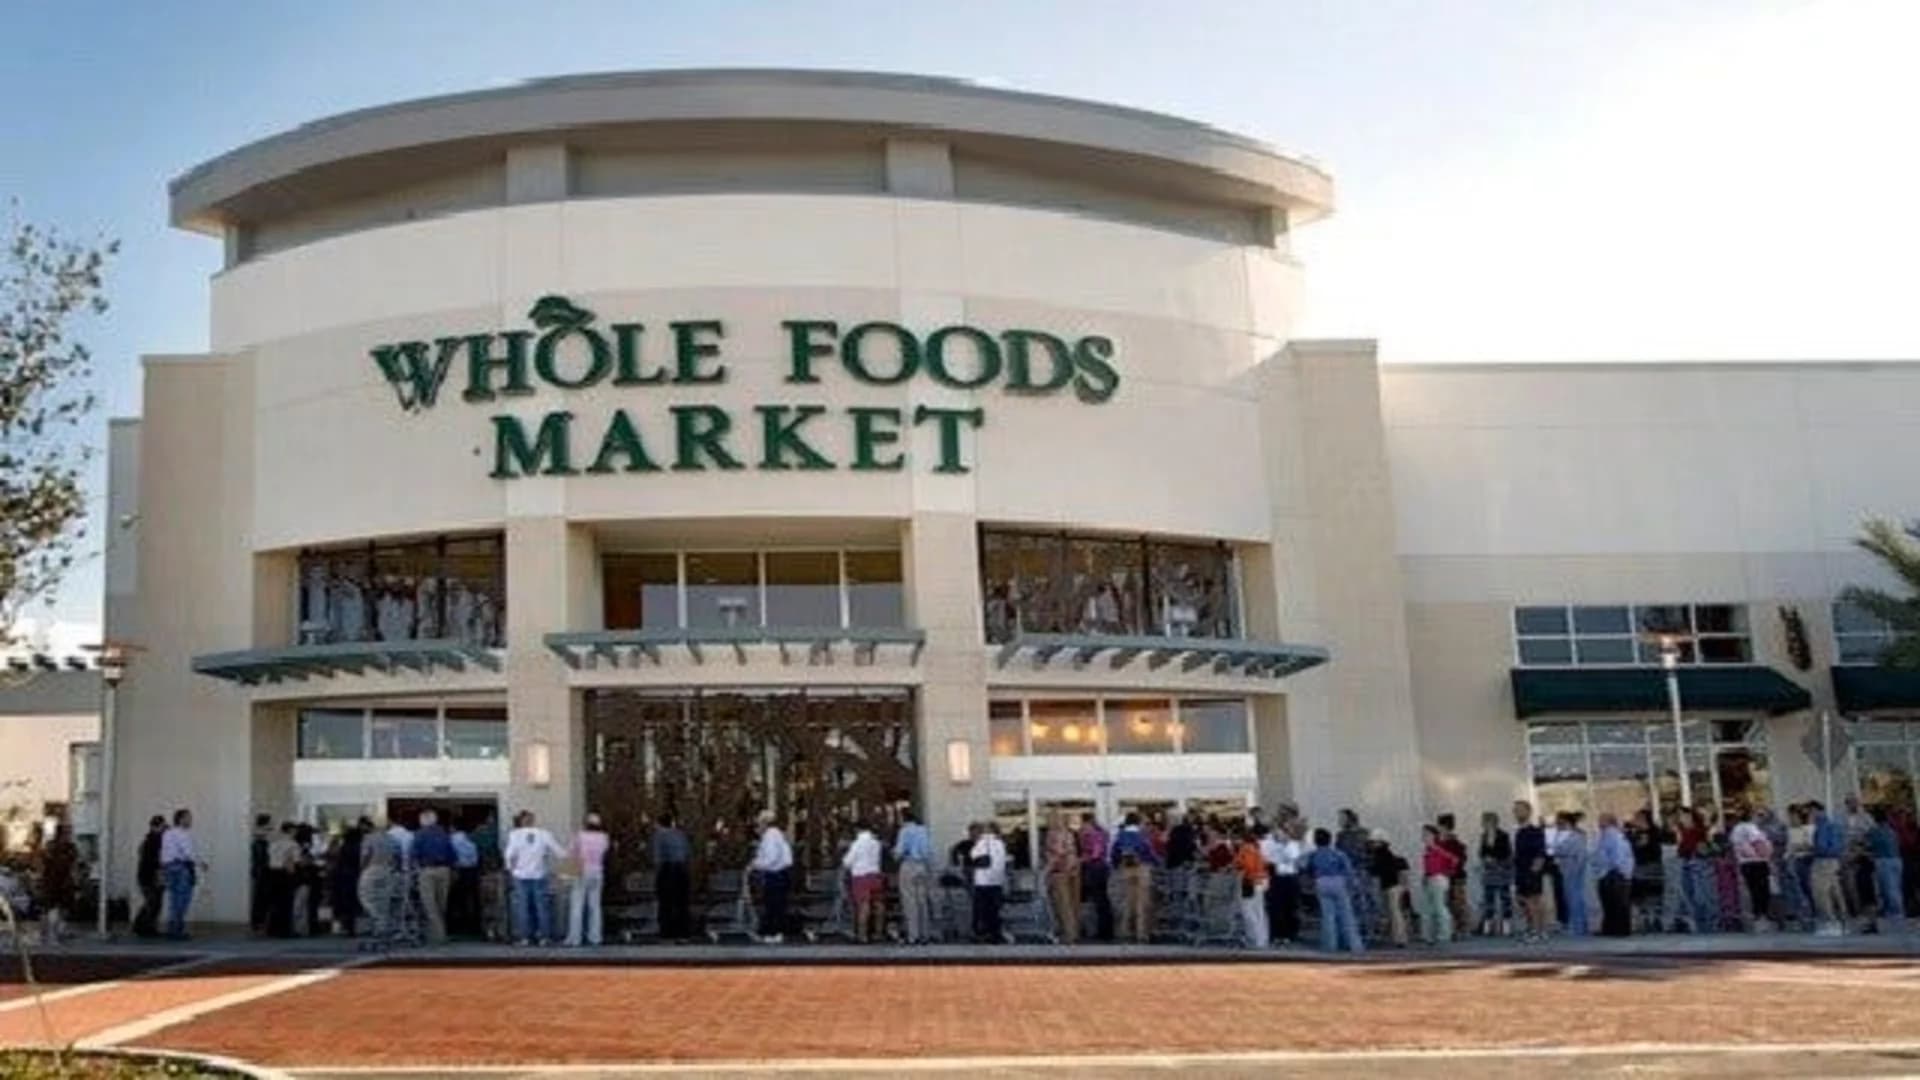 It's a done deal: Amazon takes over Whole Foods